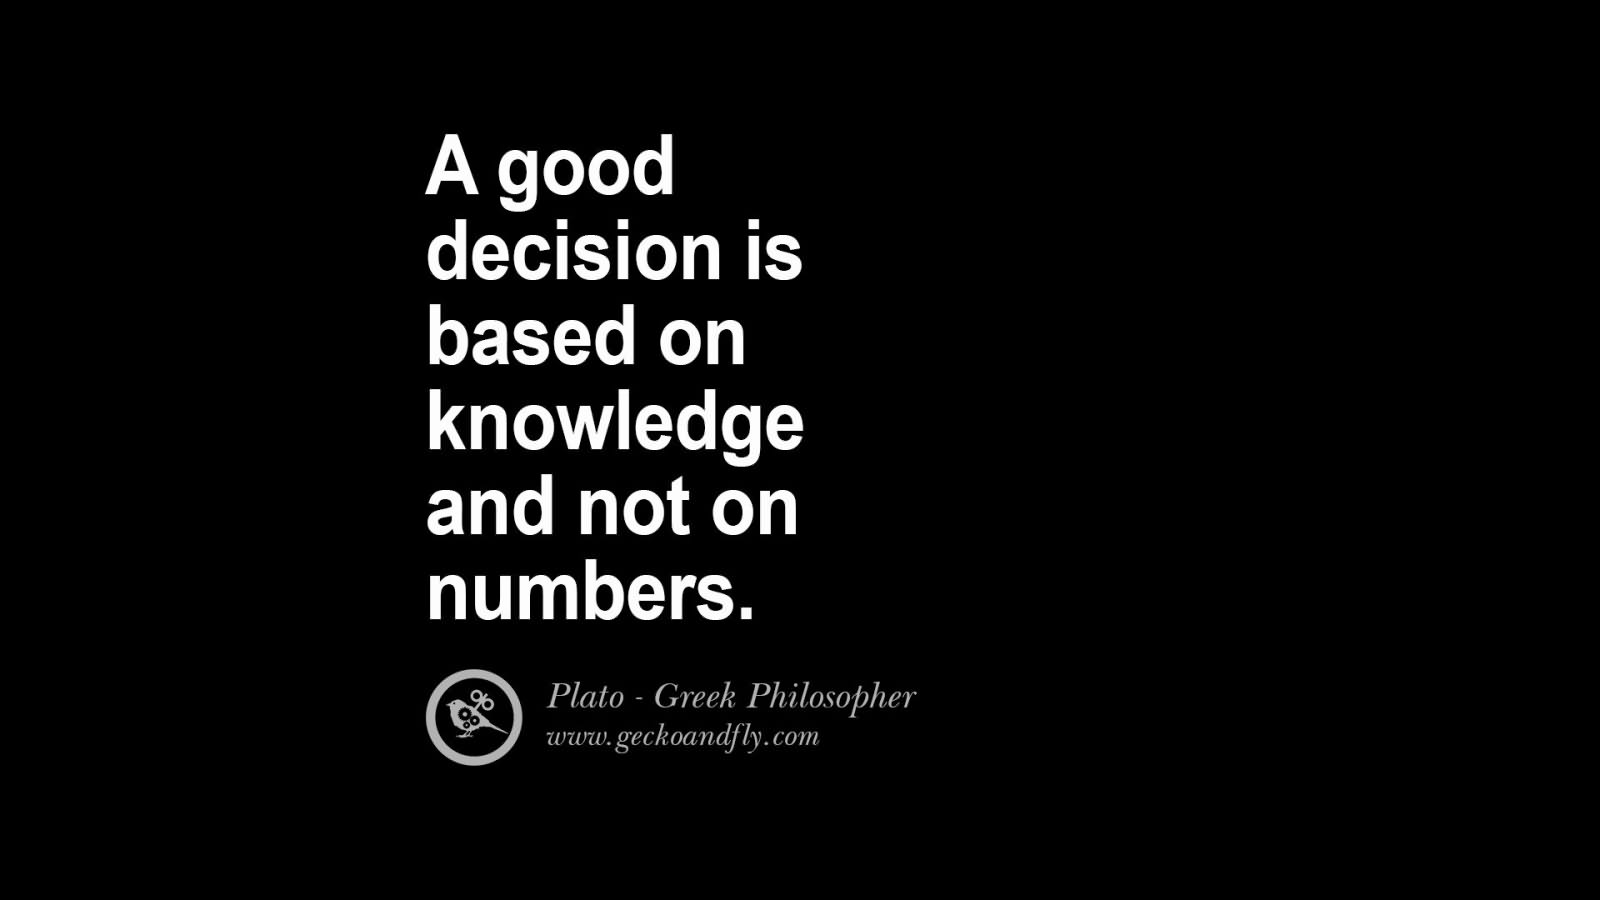 A good decision is based on knowledge and not on numbers